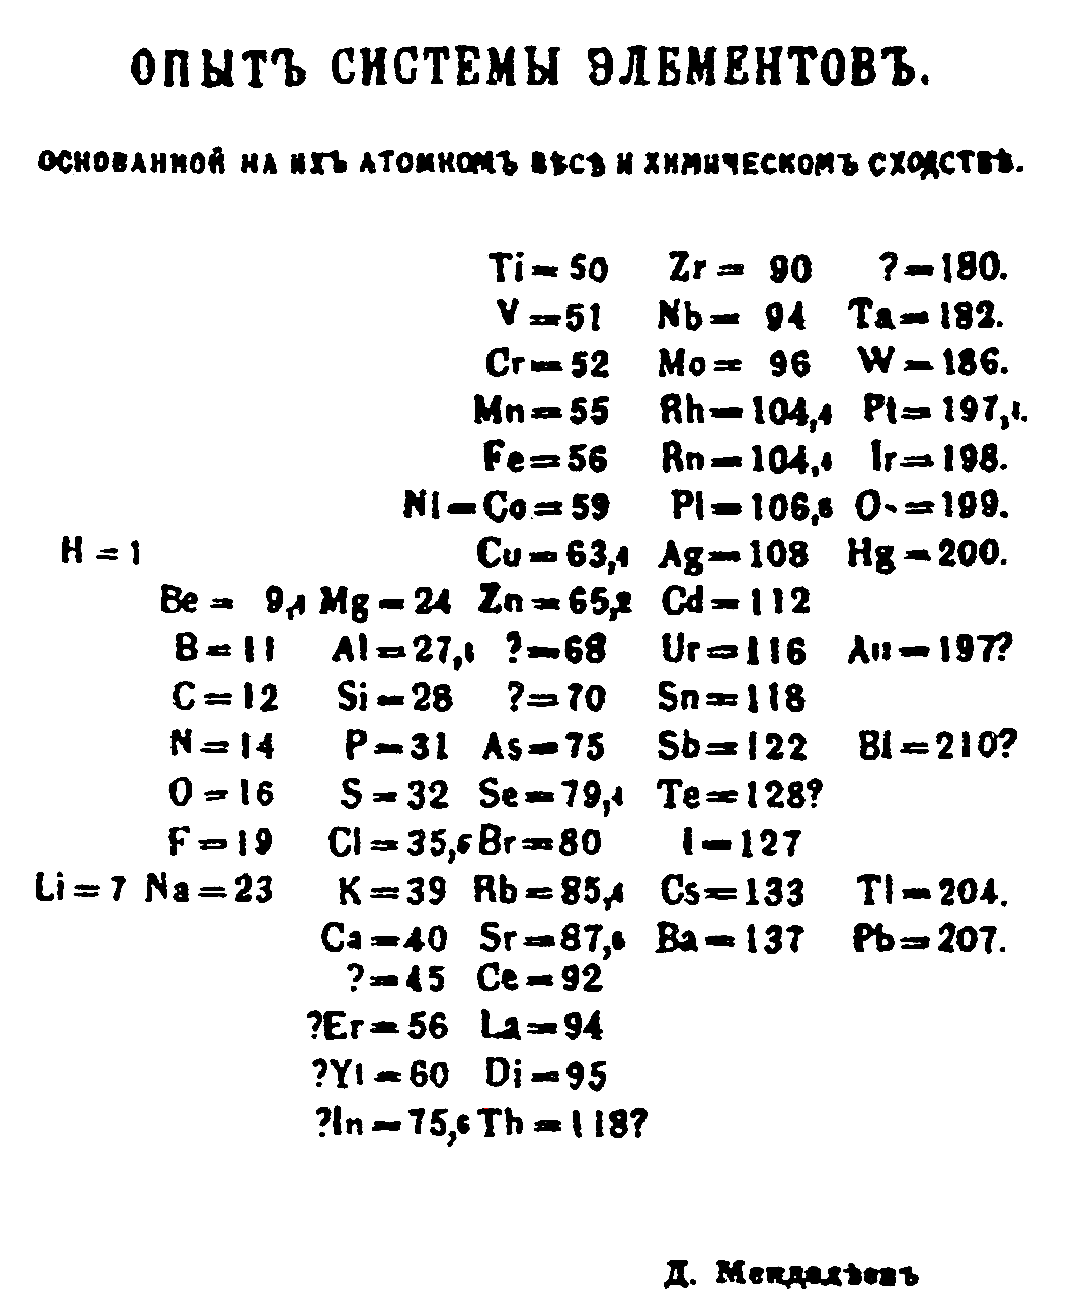 <p><strong>Fig. 2.6.&nbsp;</strong>(<b>B</b>) Periodic table created by Mendeleev in 1869 with the title in the original Russian</p>